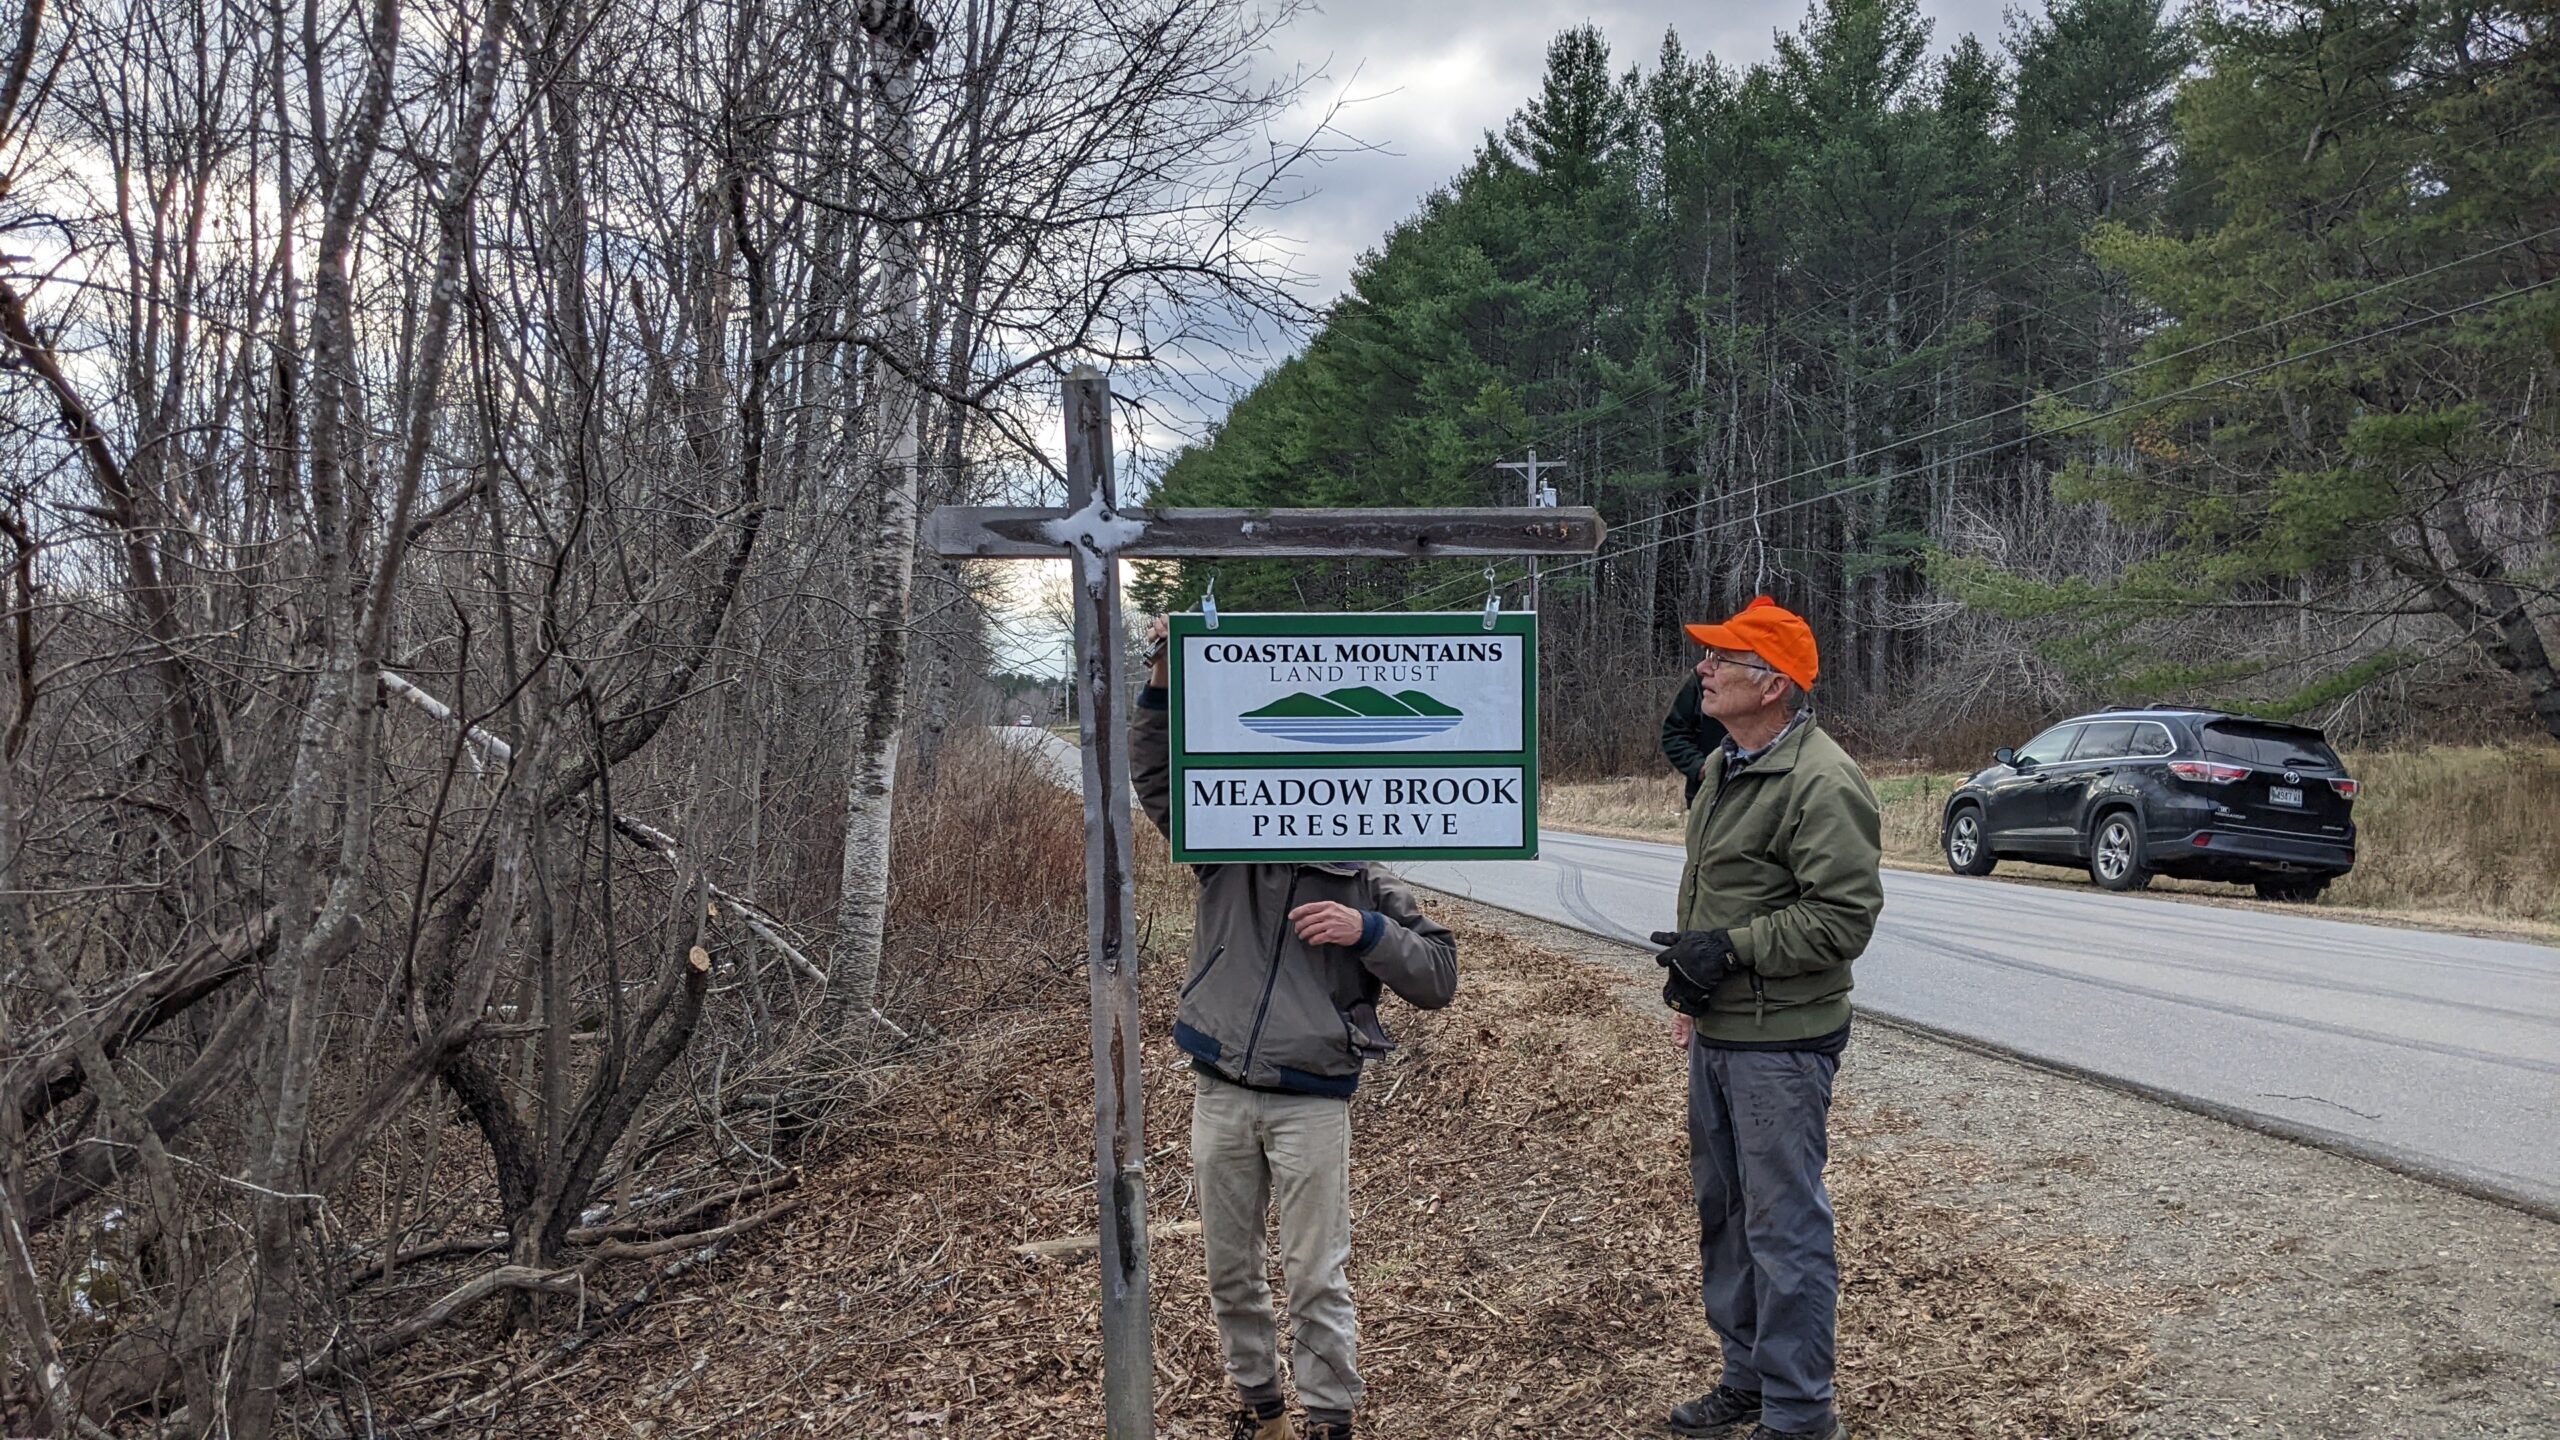 TRAILHEAD UPDATES AT THE MEADOW BROOK PRESERVE